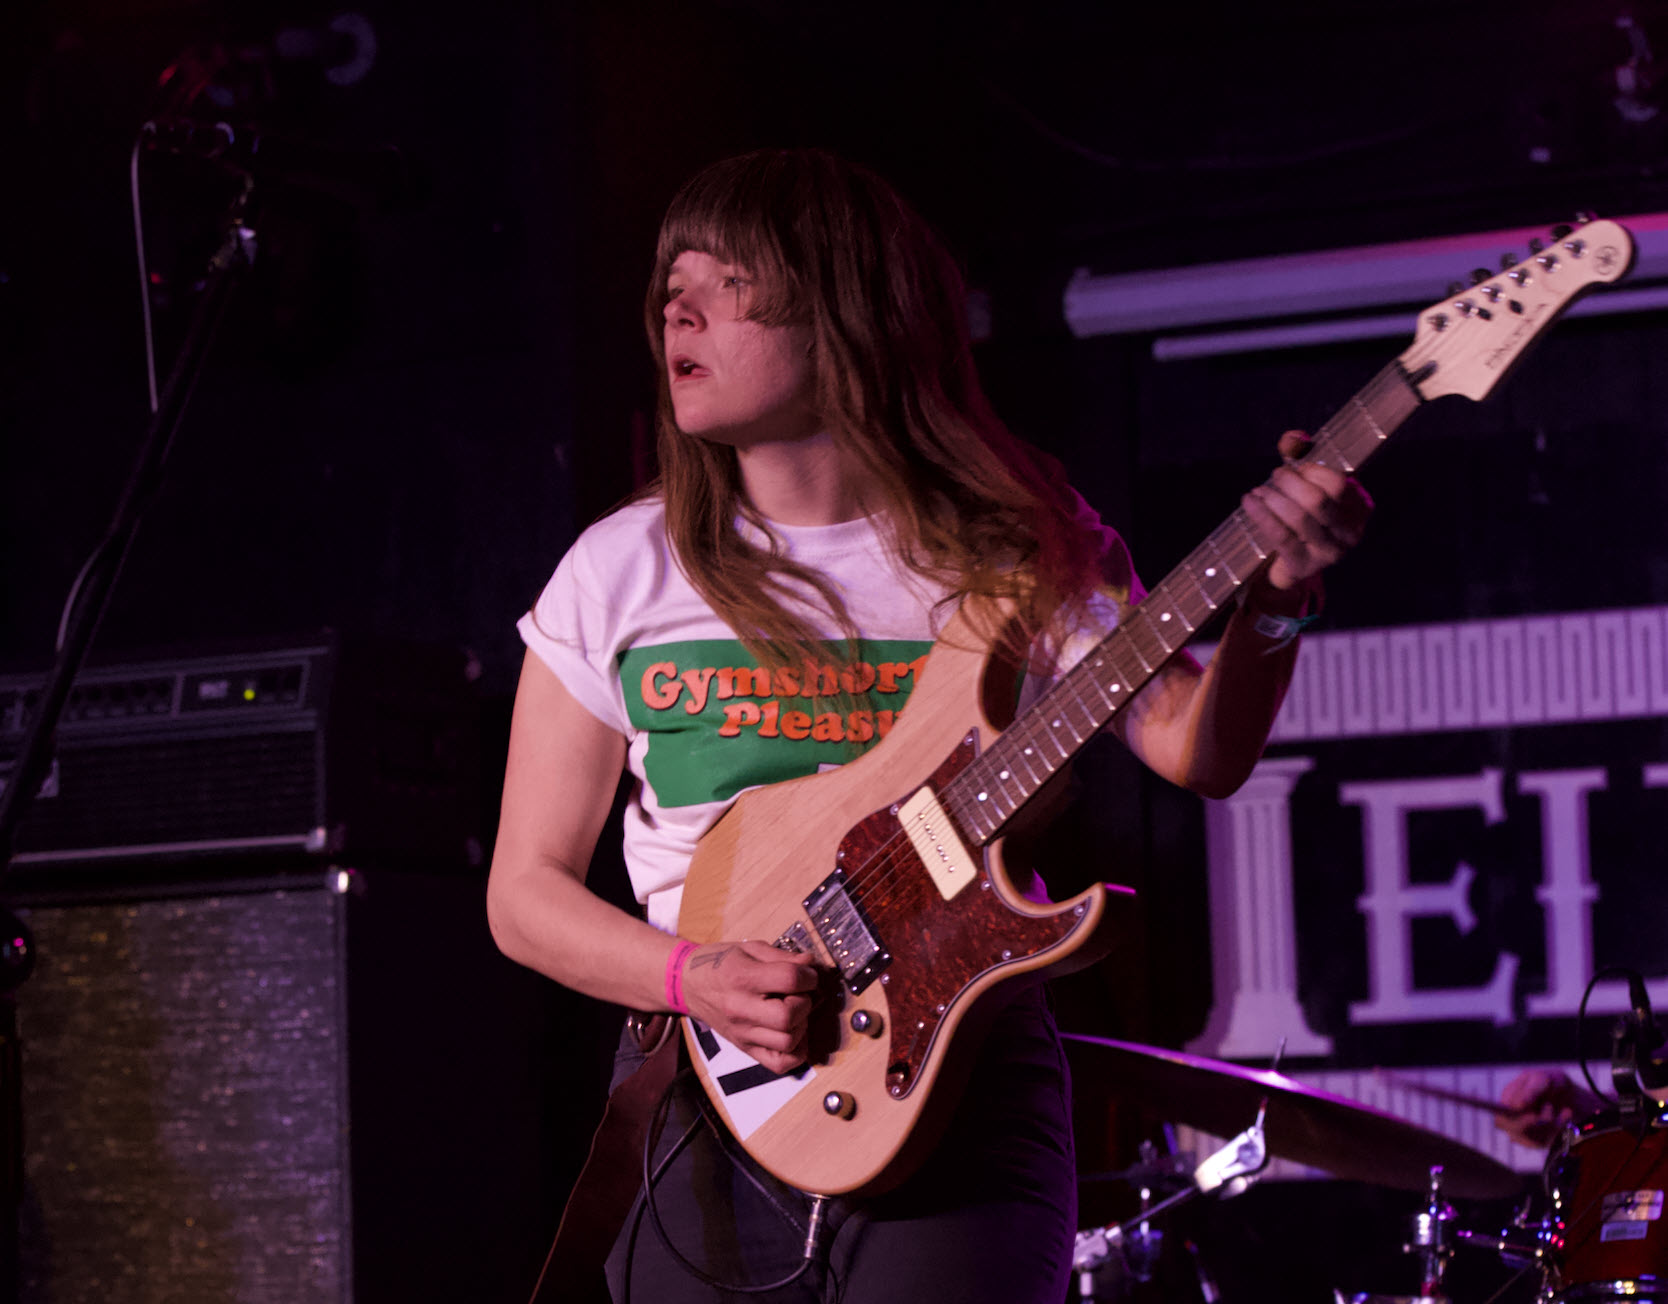 Woman with long hair and a t-shirt rocking out on a guitar on stage.